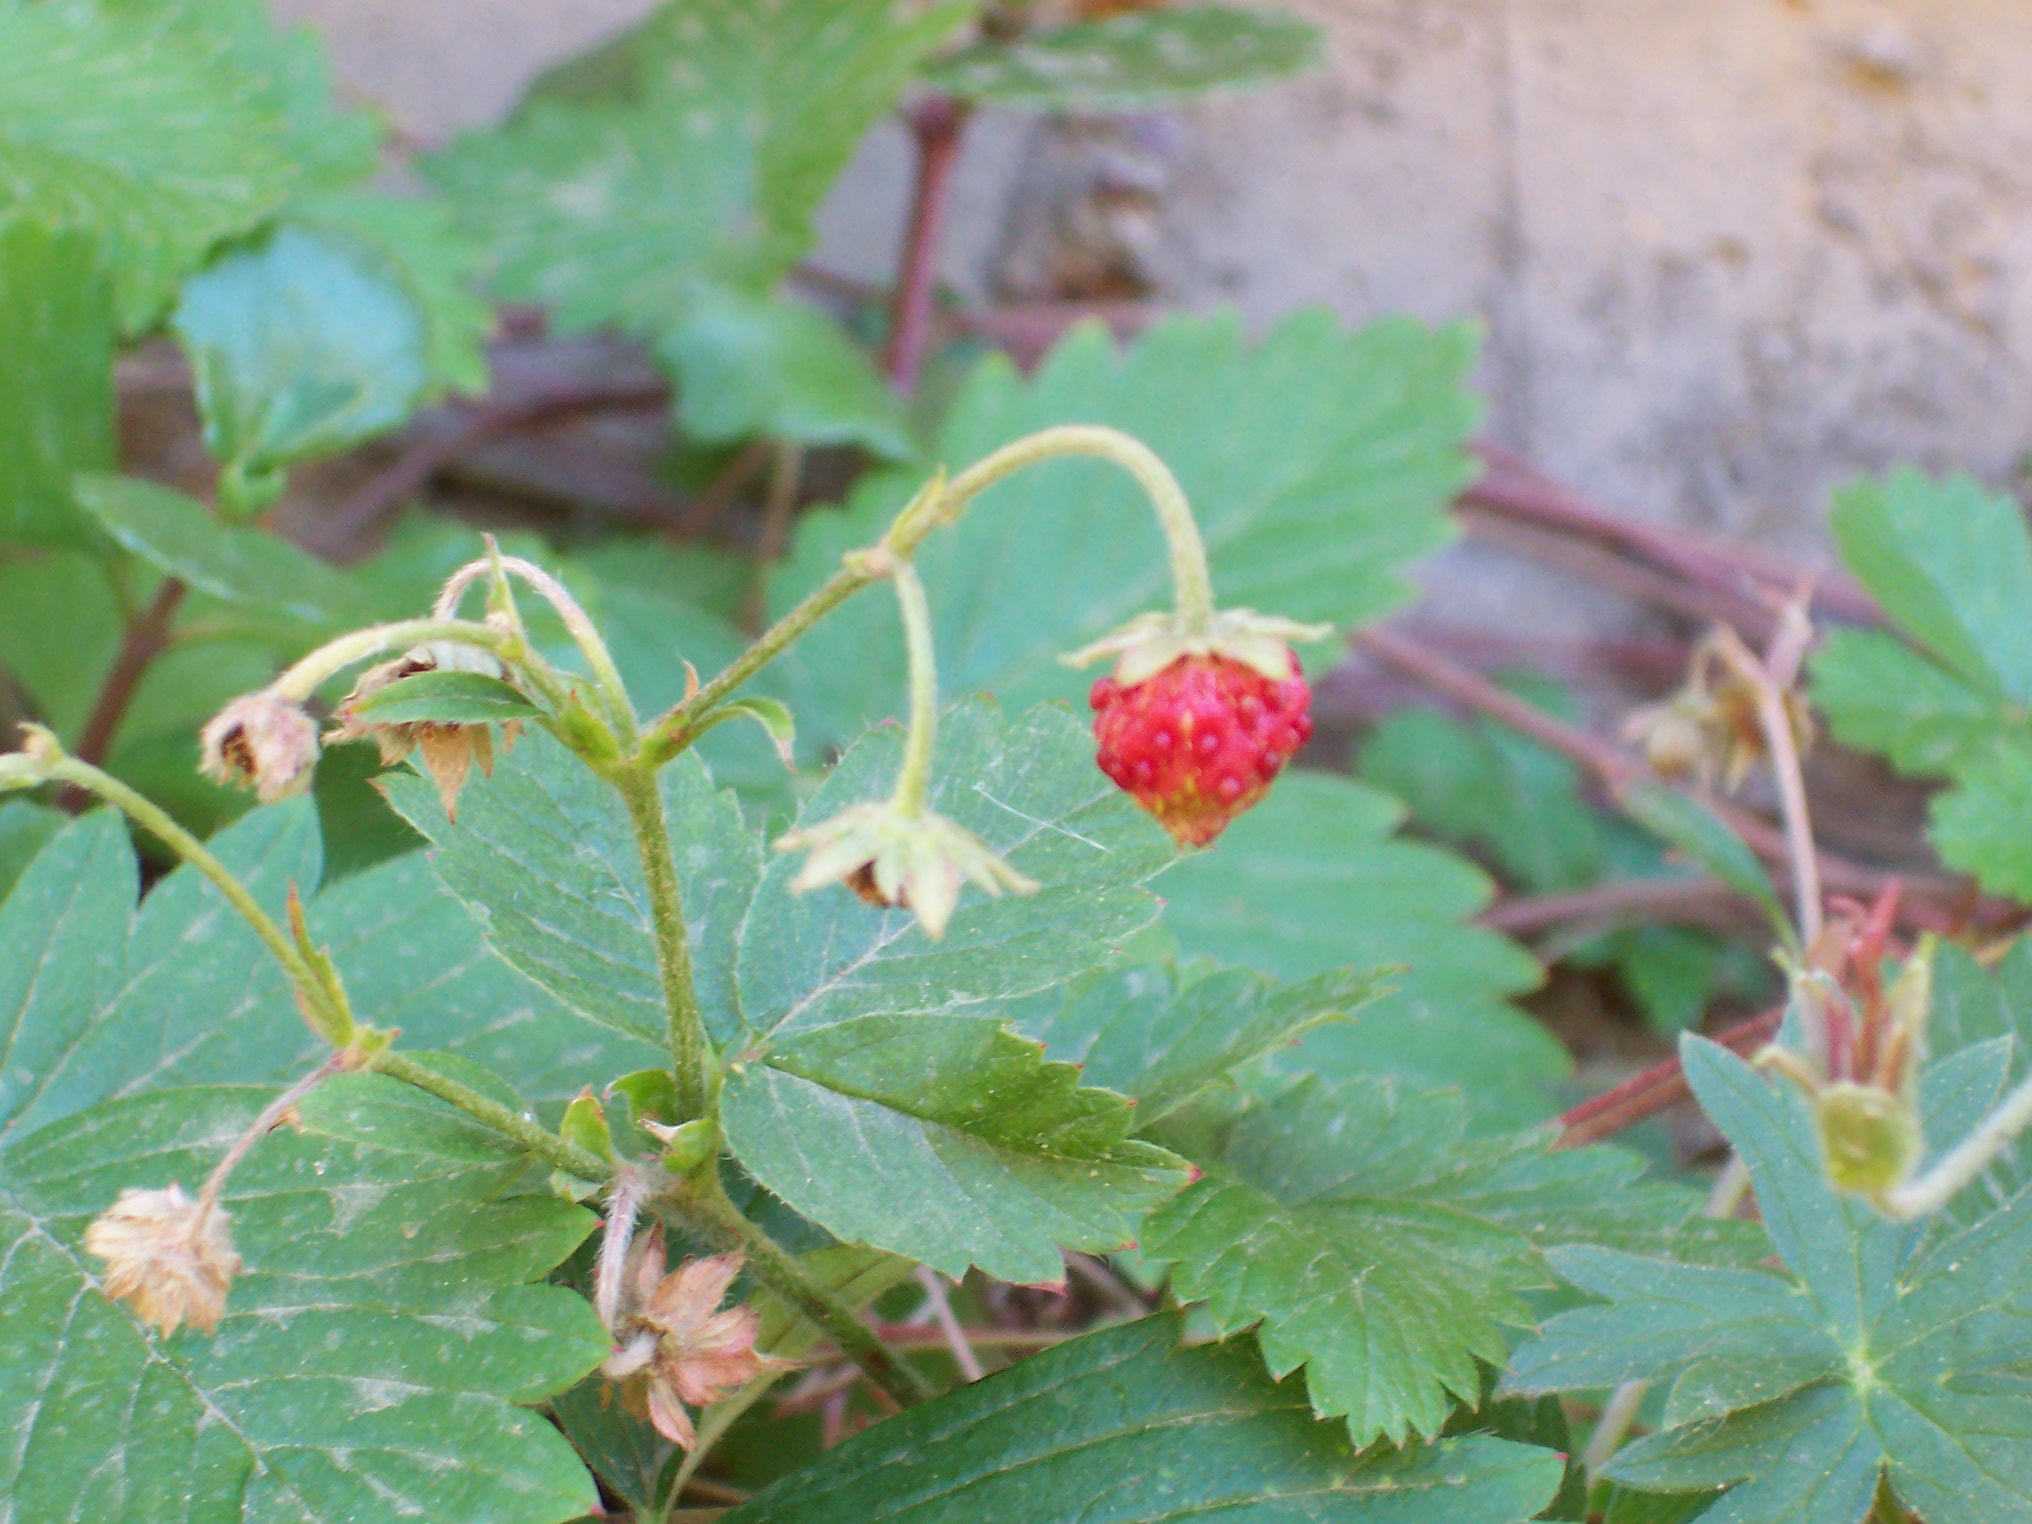 there is a strawberry plant that is growing